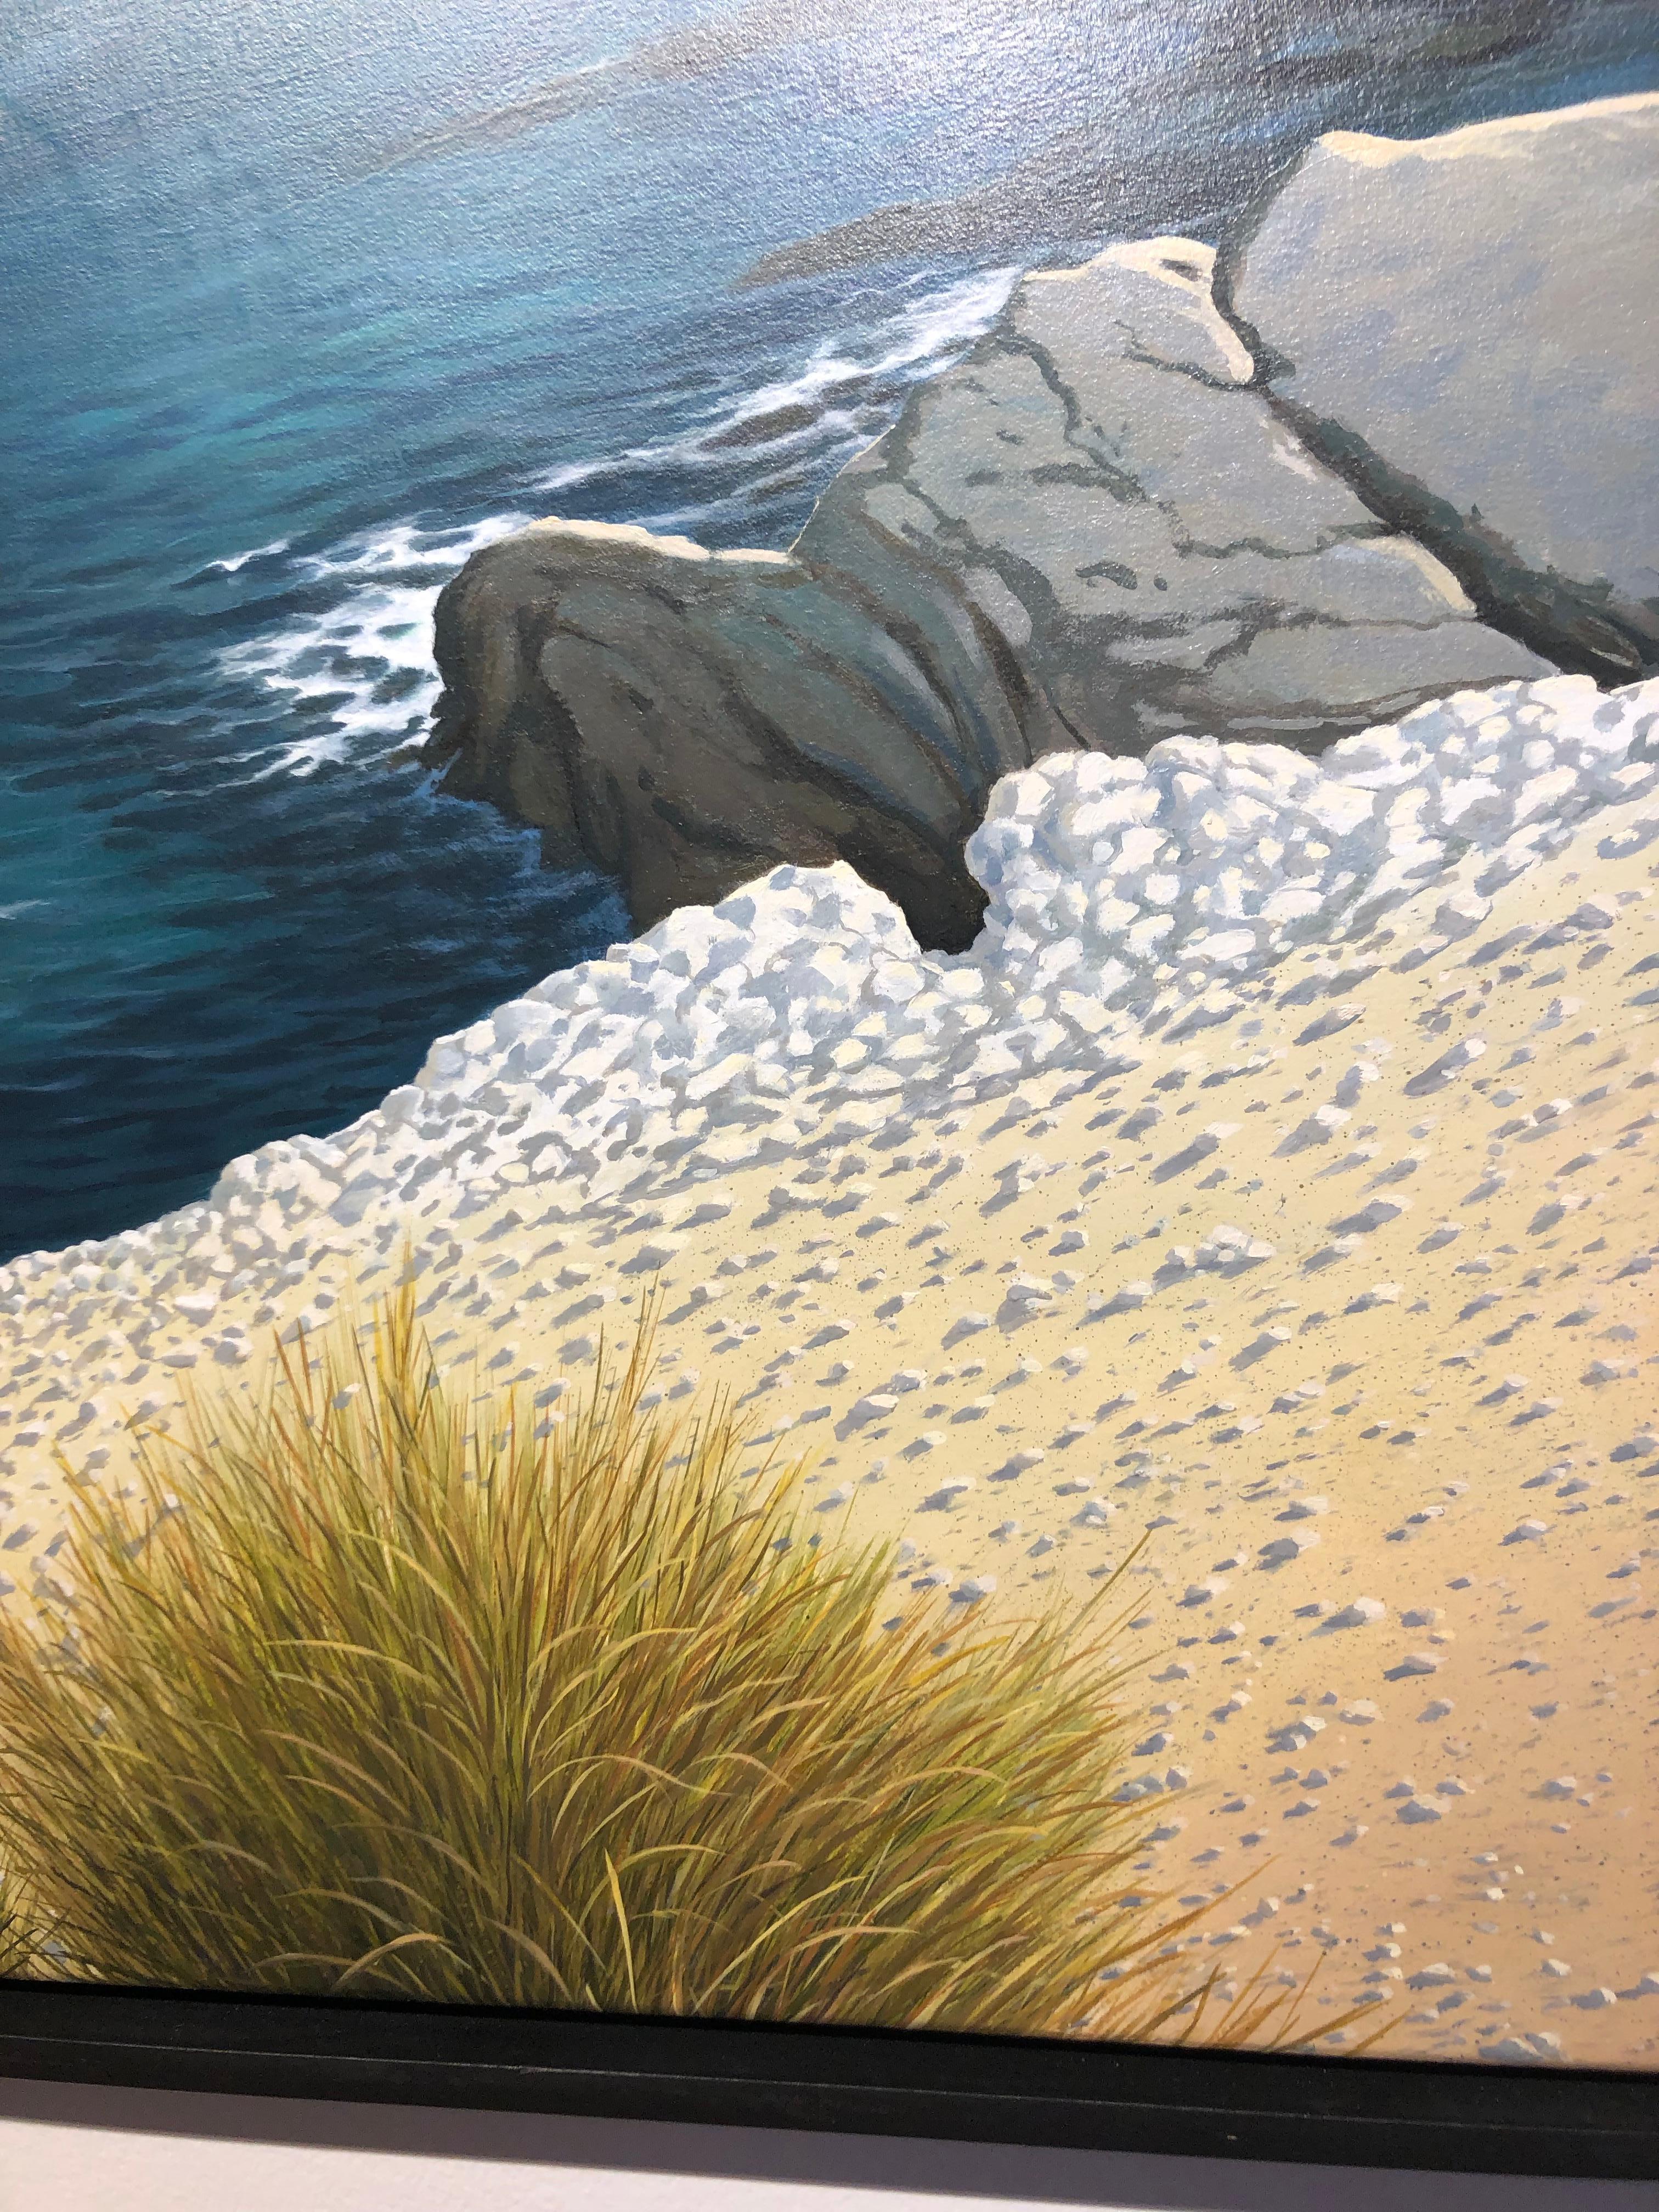 Evocation - Ocean Cliffside Scene Bathed in Warm Light and Blue Turquoise Water 3